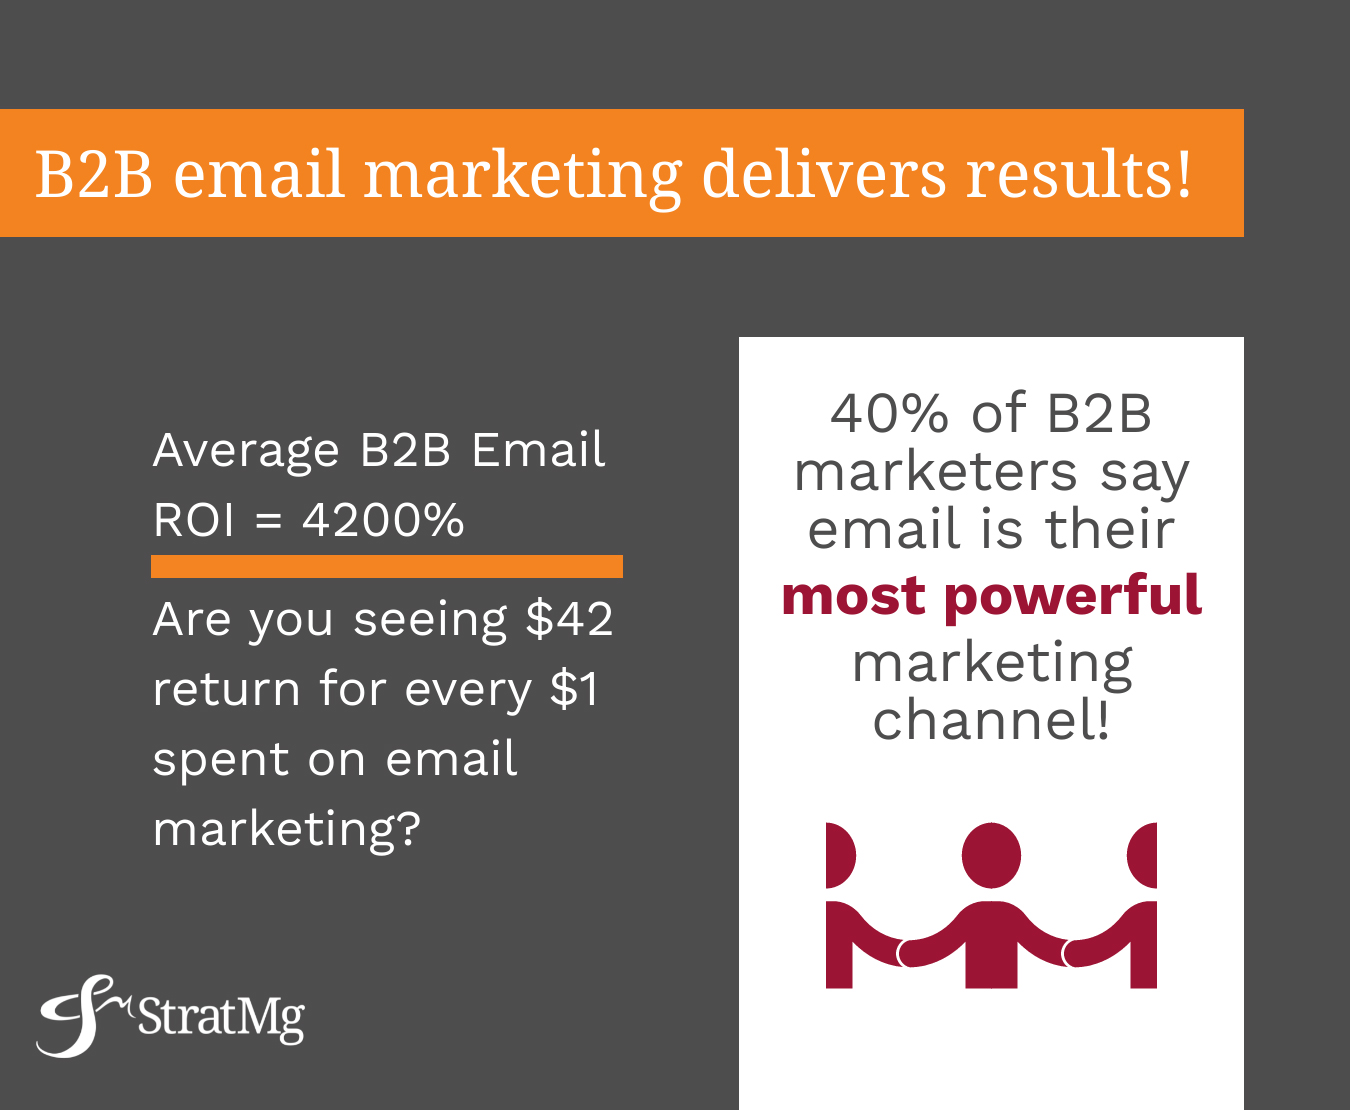 Image shows text: B2B email marketing delivers results! Average B2B Email ROI = 4200% Are you seeing $42 return for every $1 spent on email marketing? 40% of B2B marketers say email is their most powerful marketing channel with the StratMg logo and icons of people holding hands.